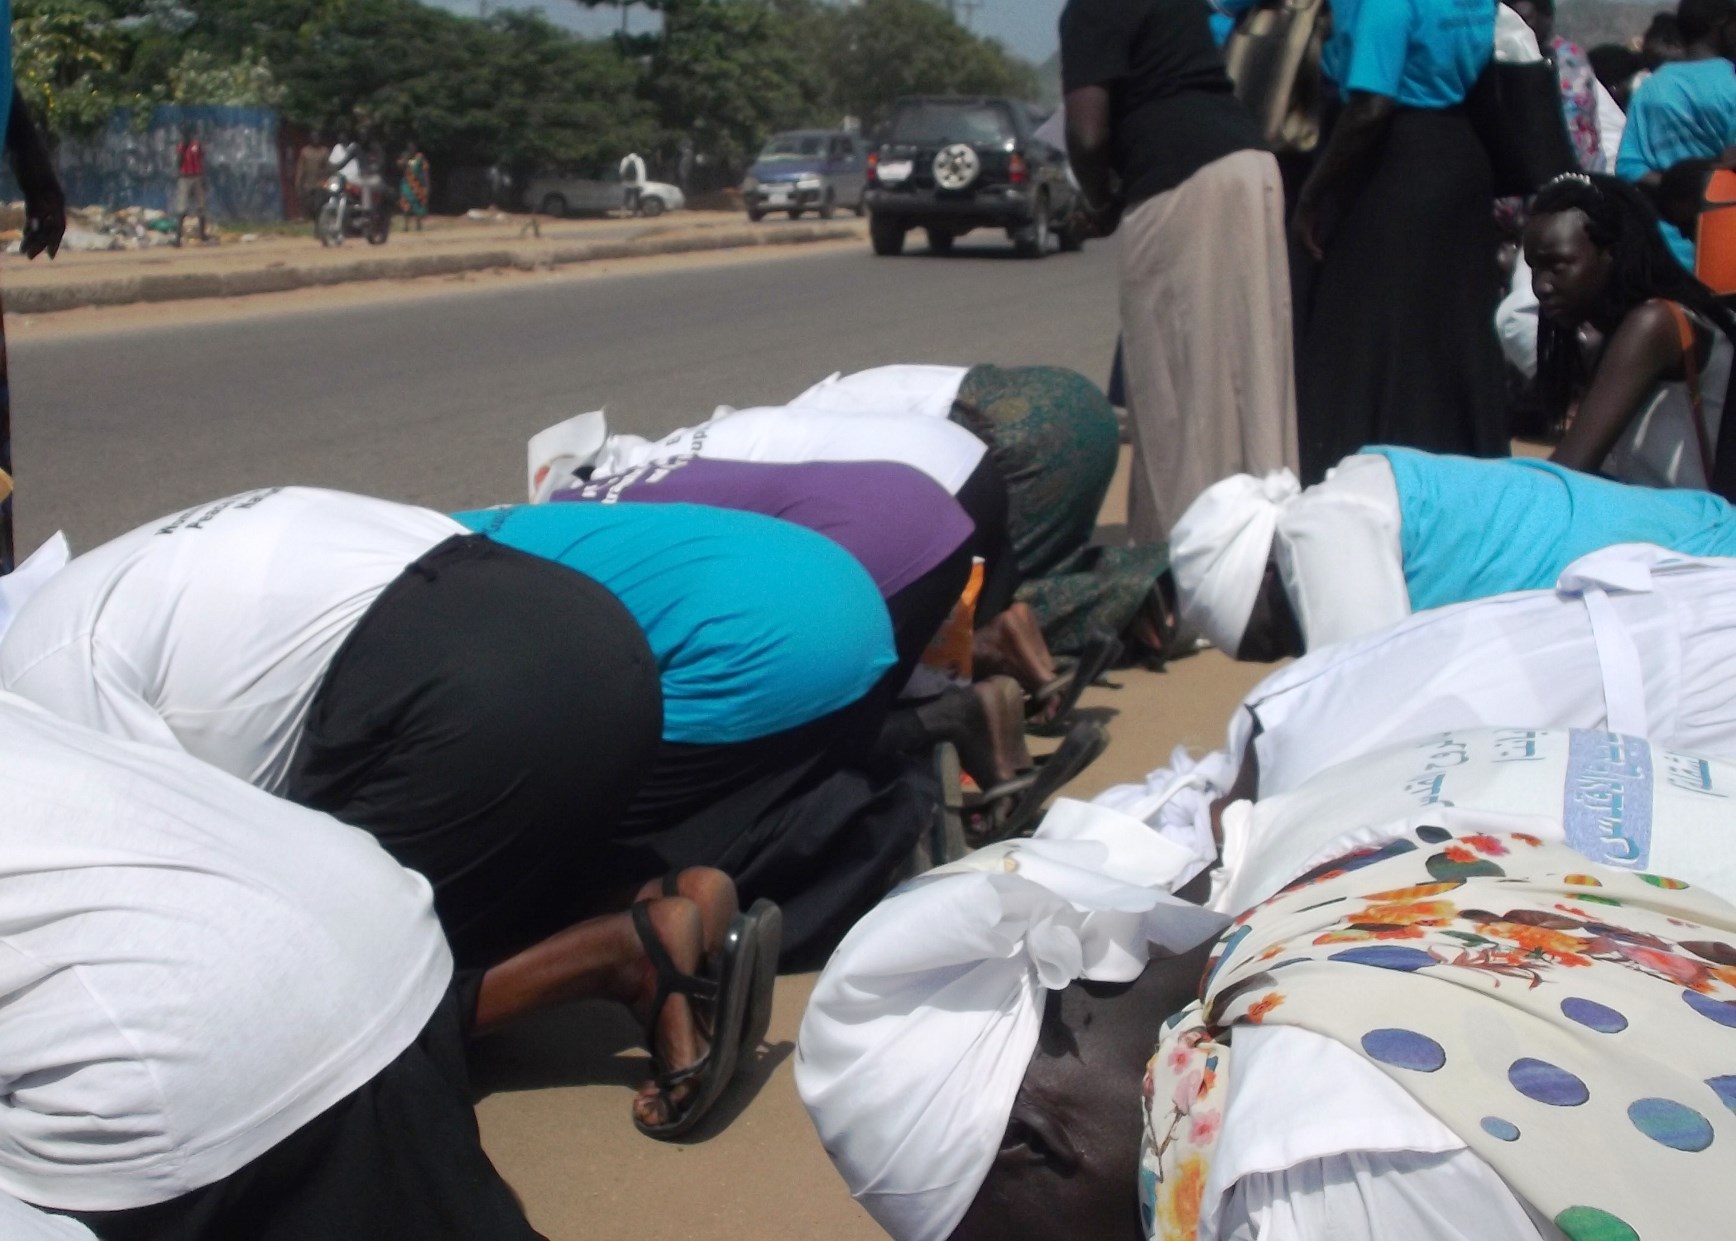 Women pray for peace in South Sudan during an ecumenical march and prayer service.